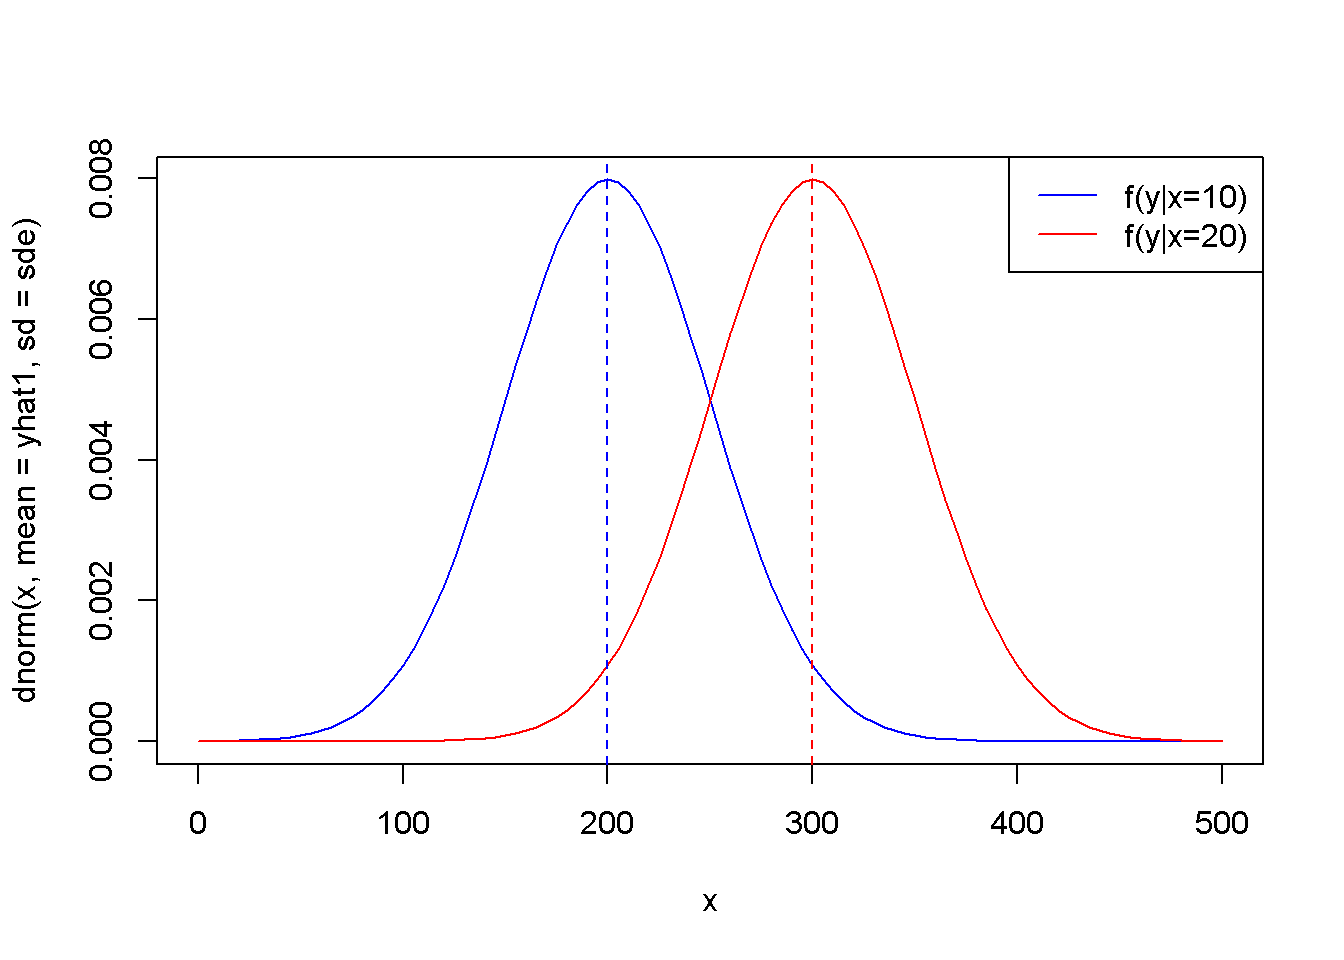 The theoretical (true) probability distributions of food expenditure, given two levels of income